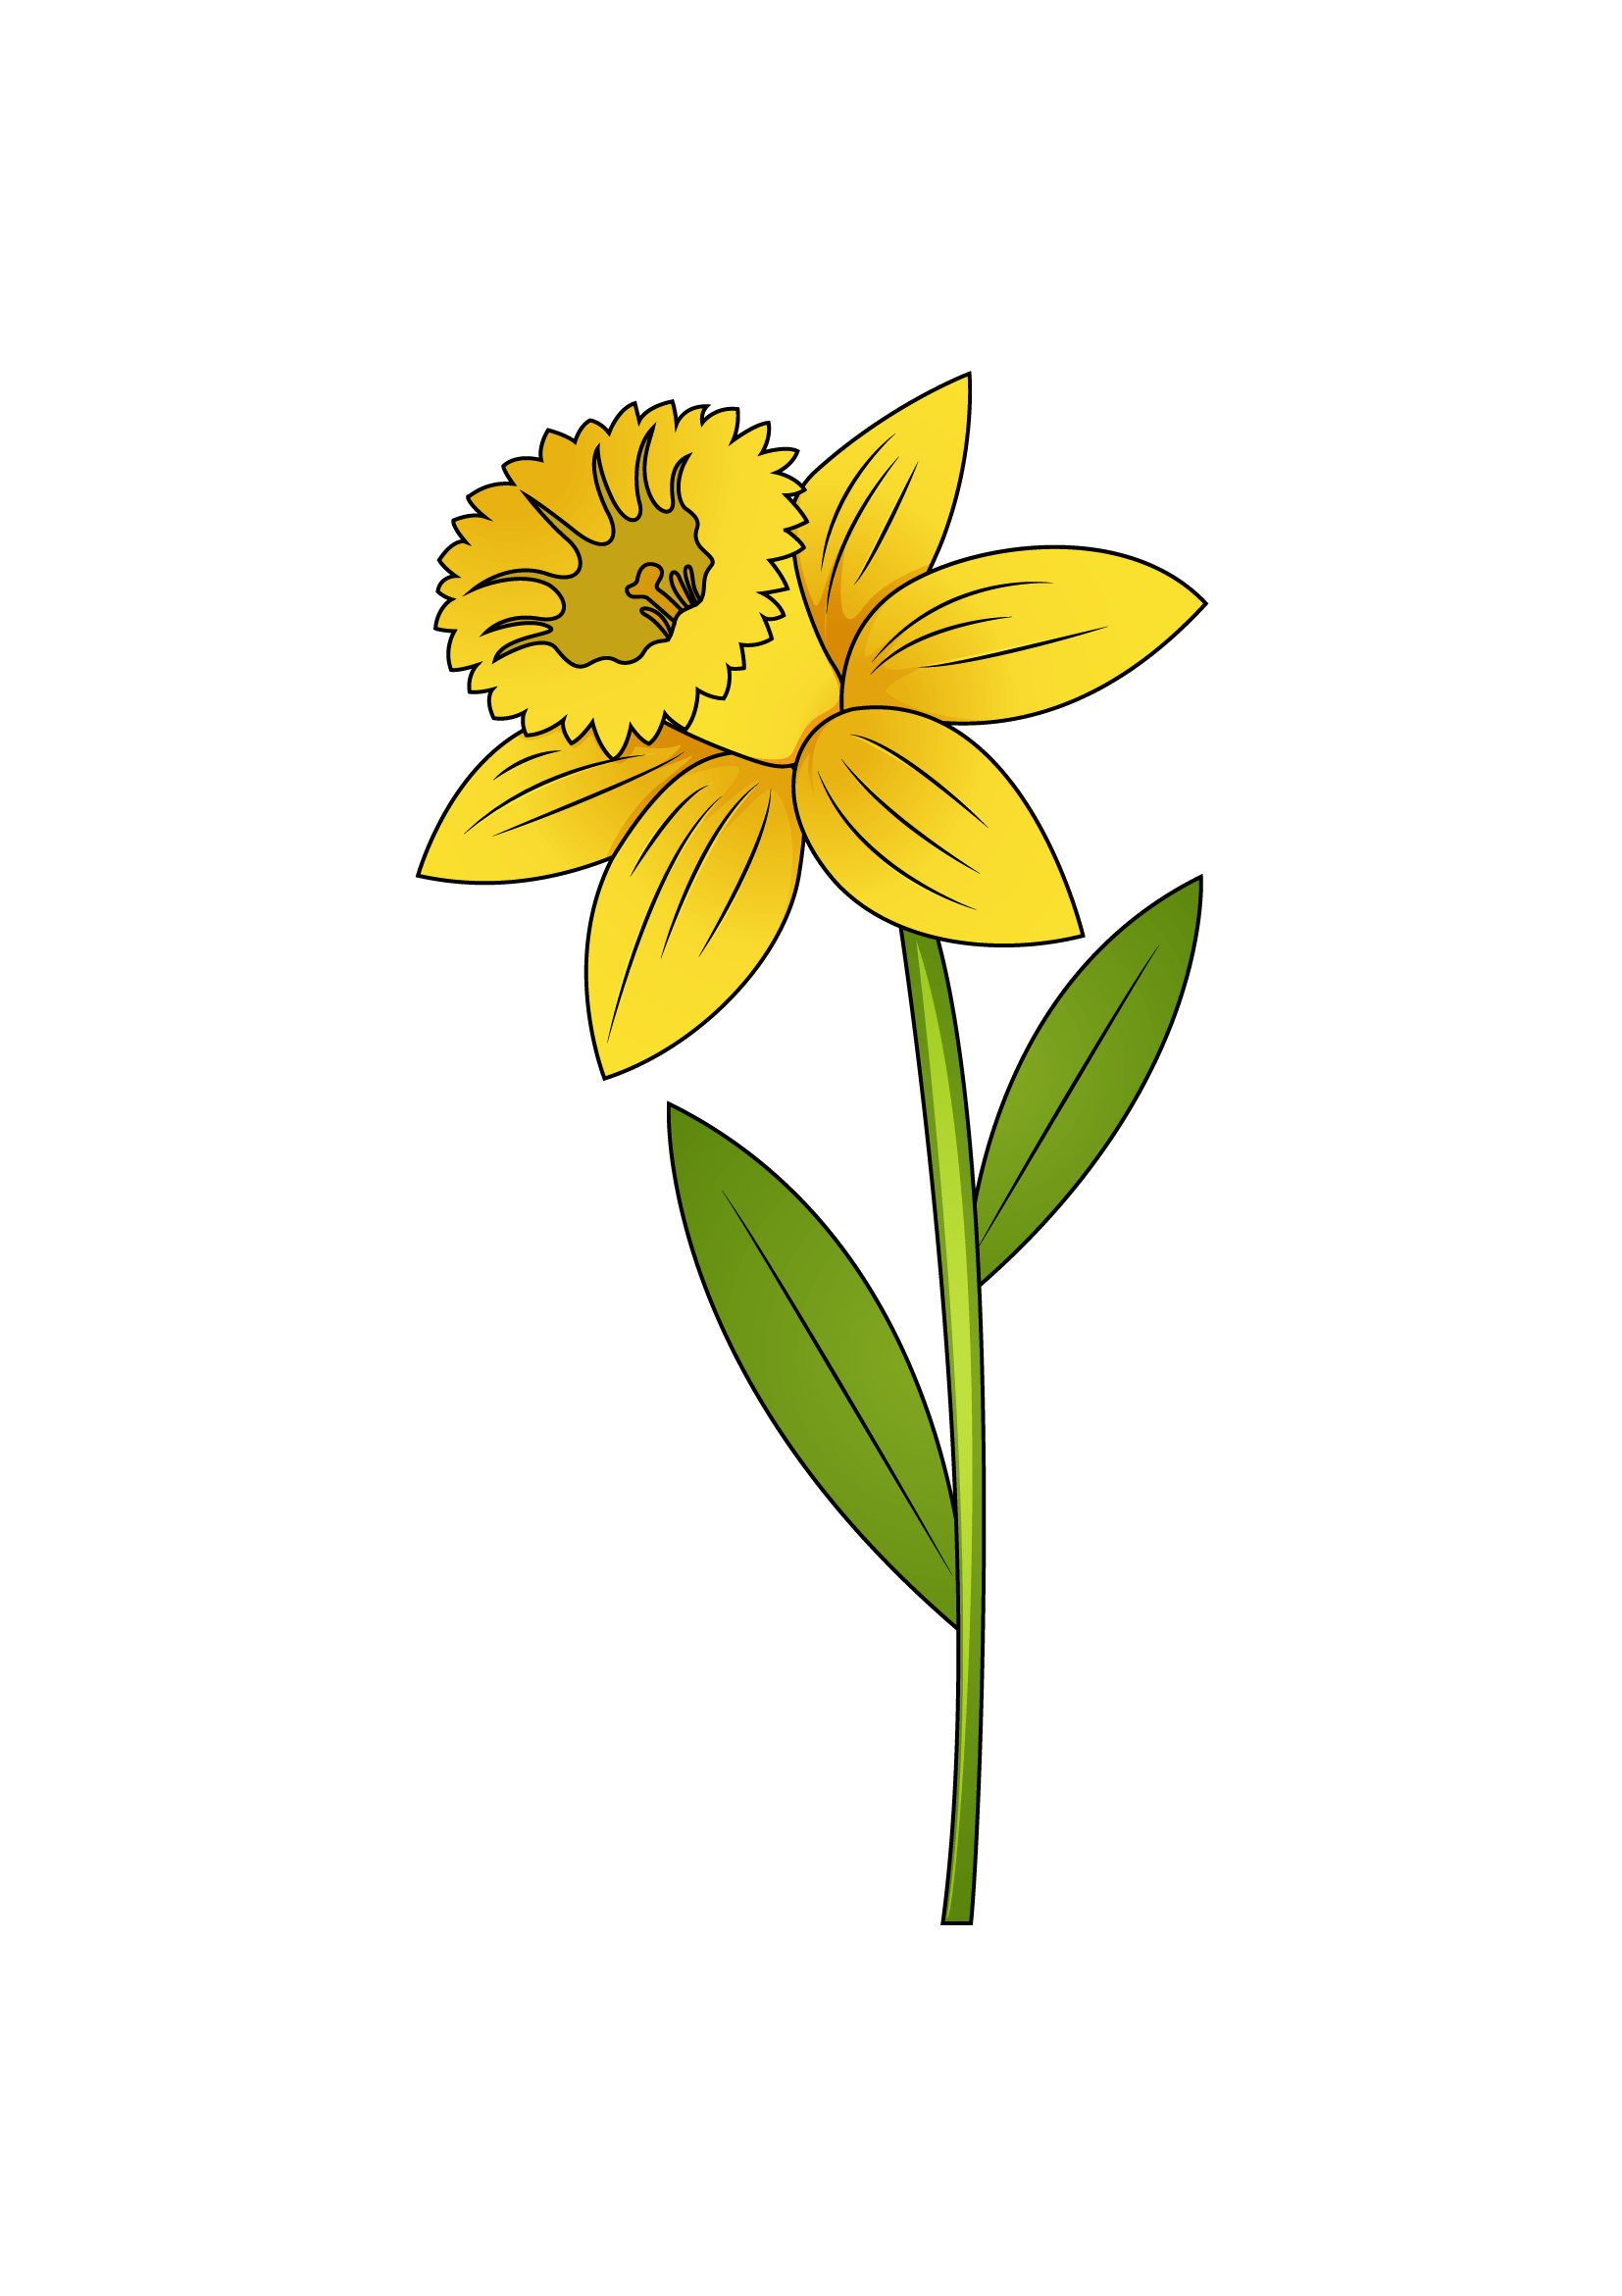 How to Draw A Daffodil Step by Step Printable